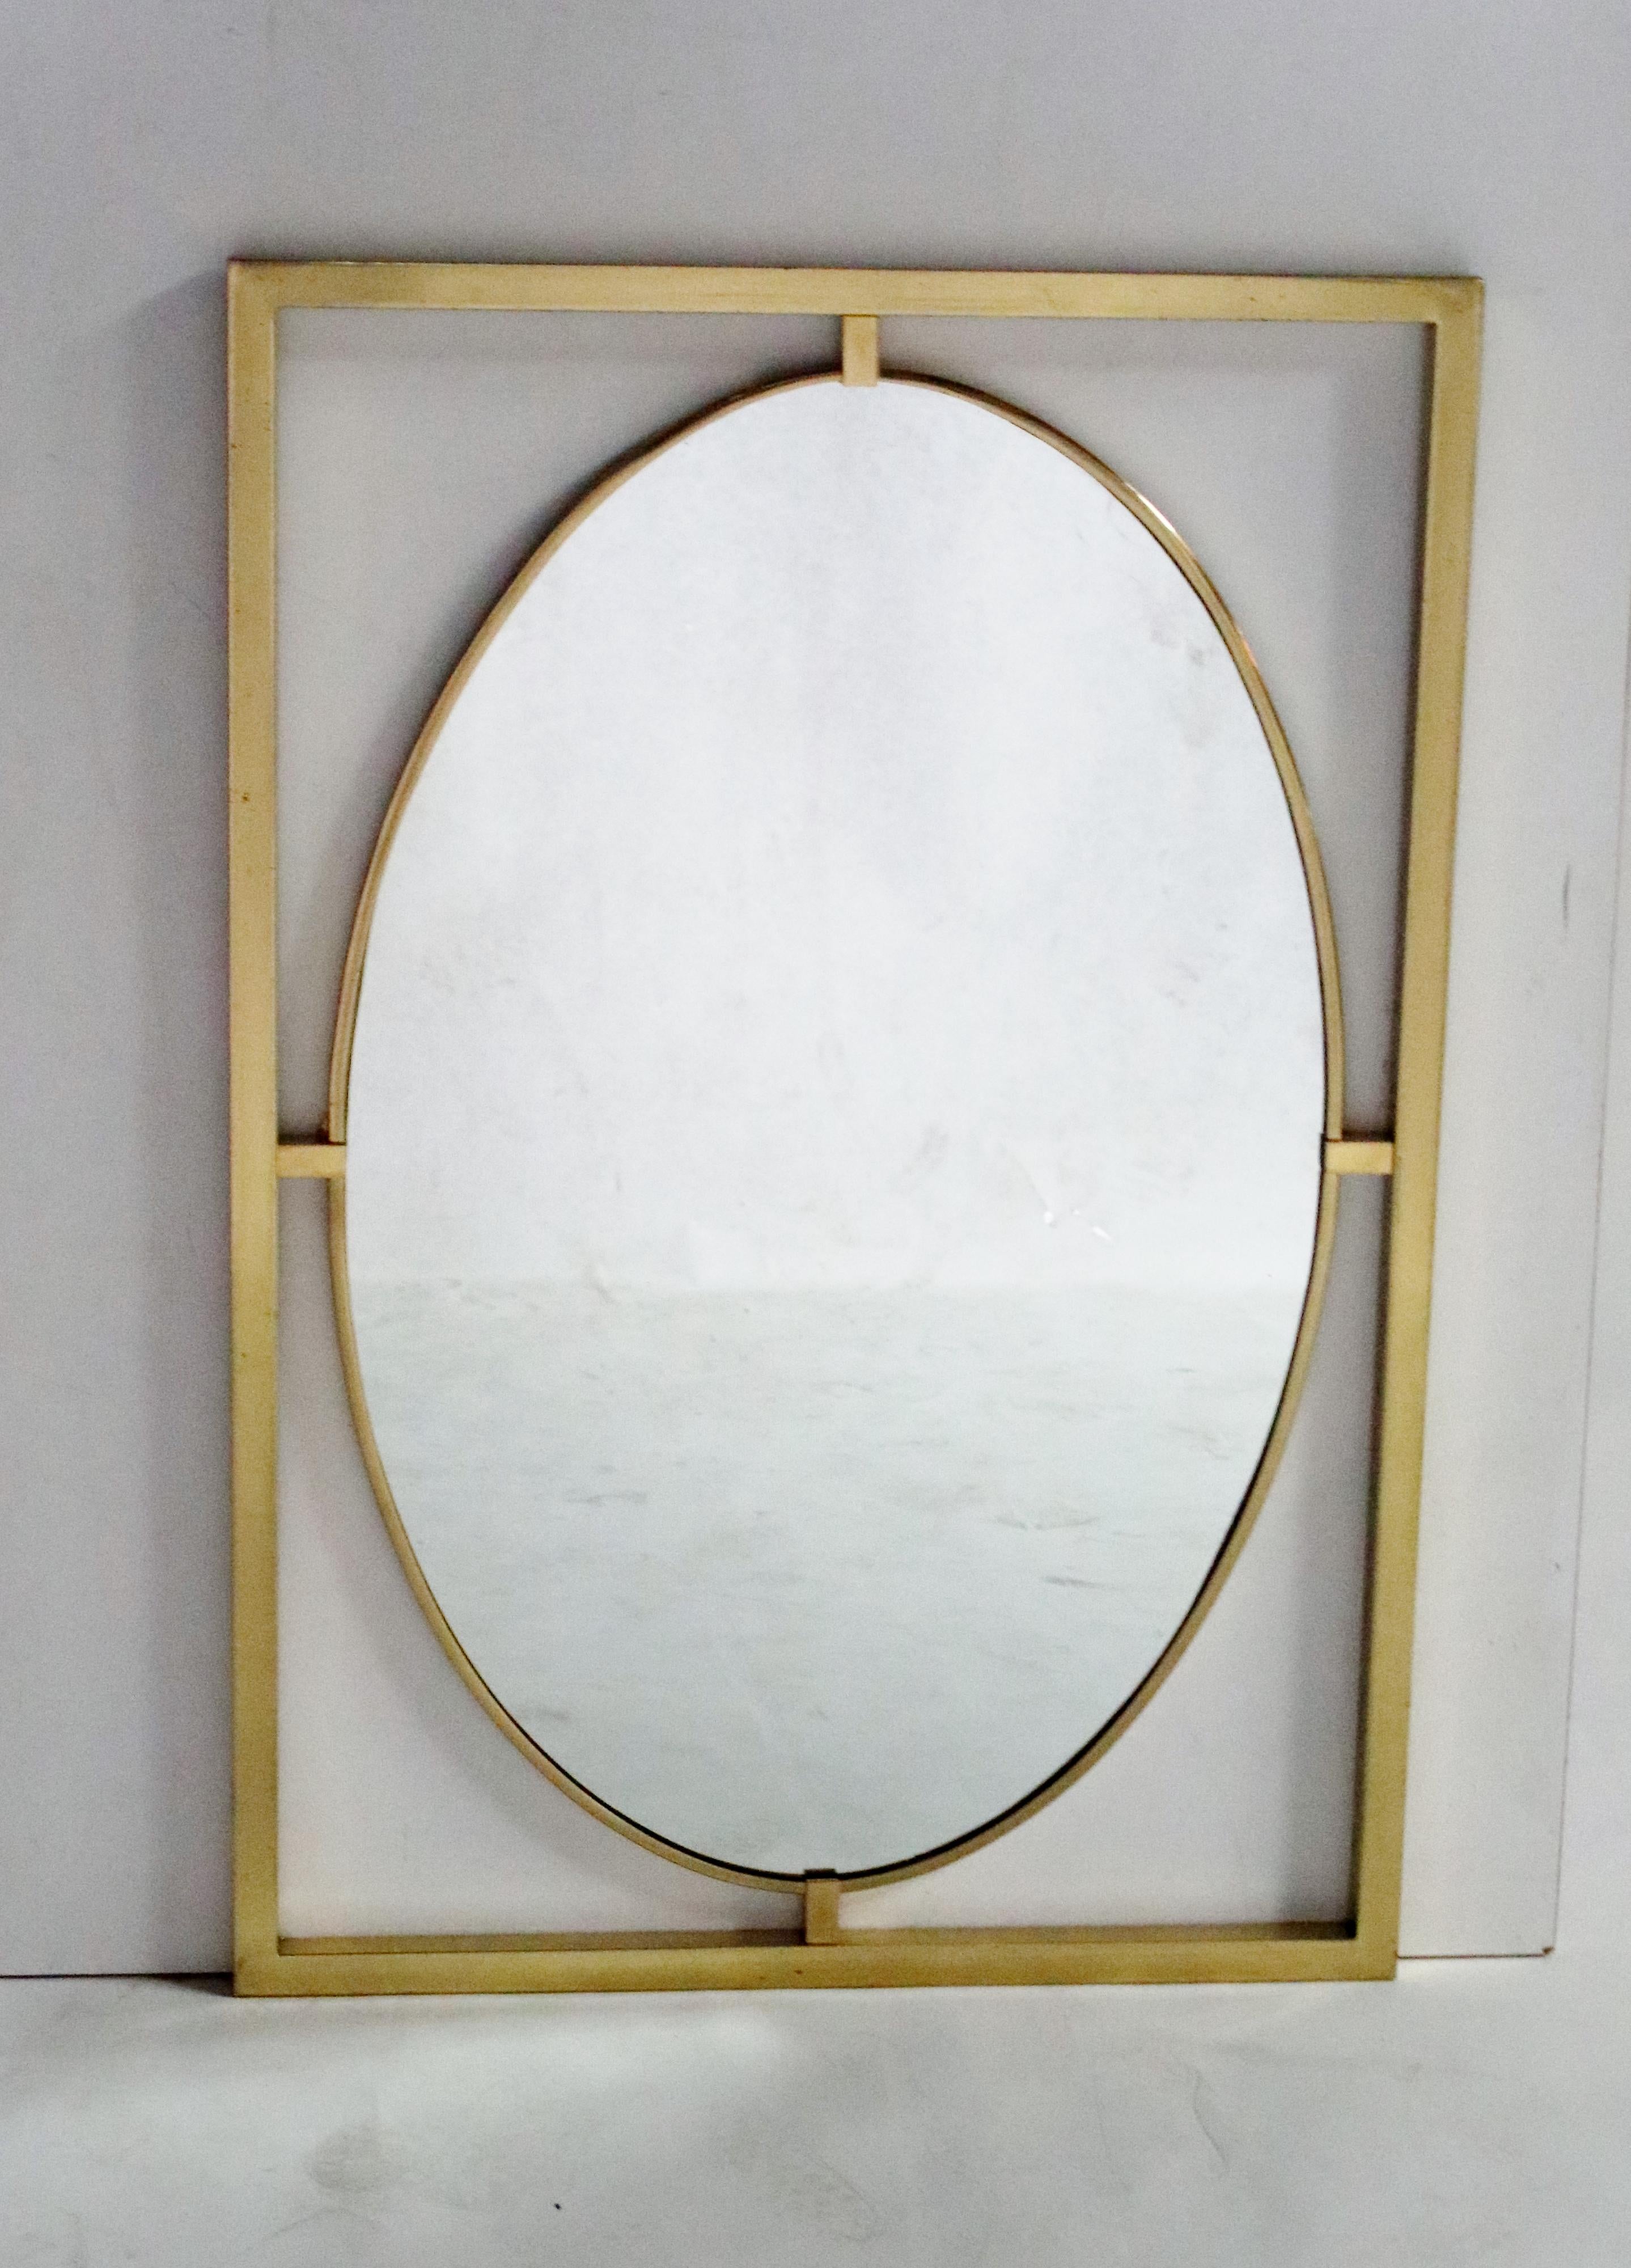 Midcentury brass oval mirror framed in brass metal by La Barge. Labelled on verso.